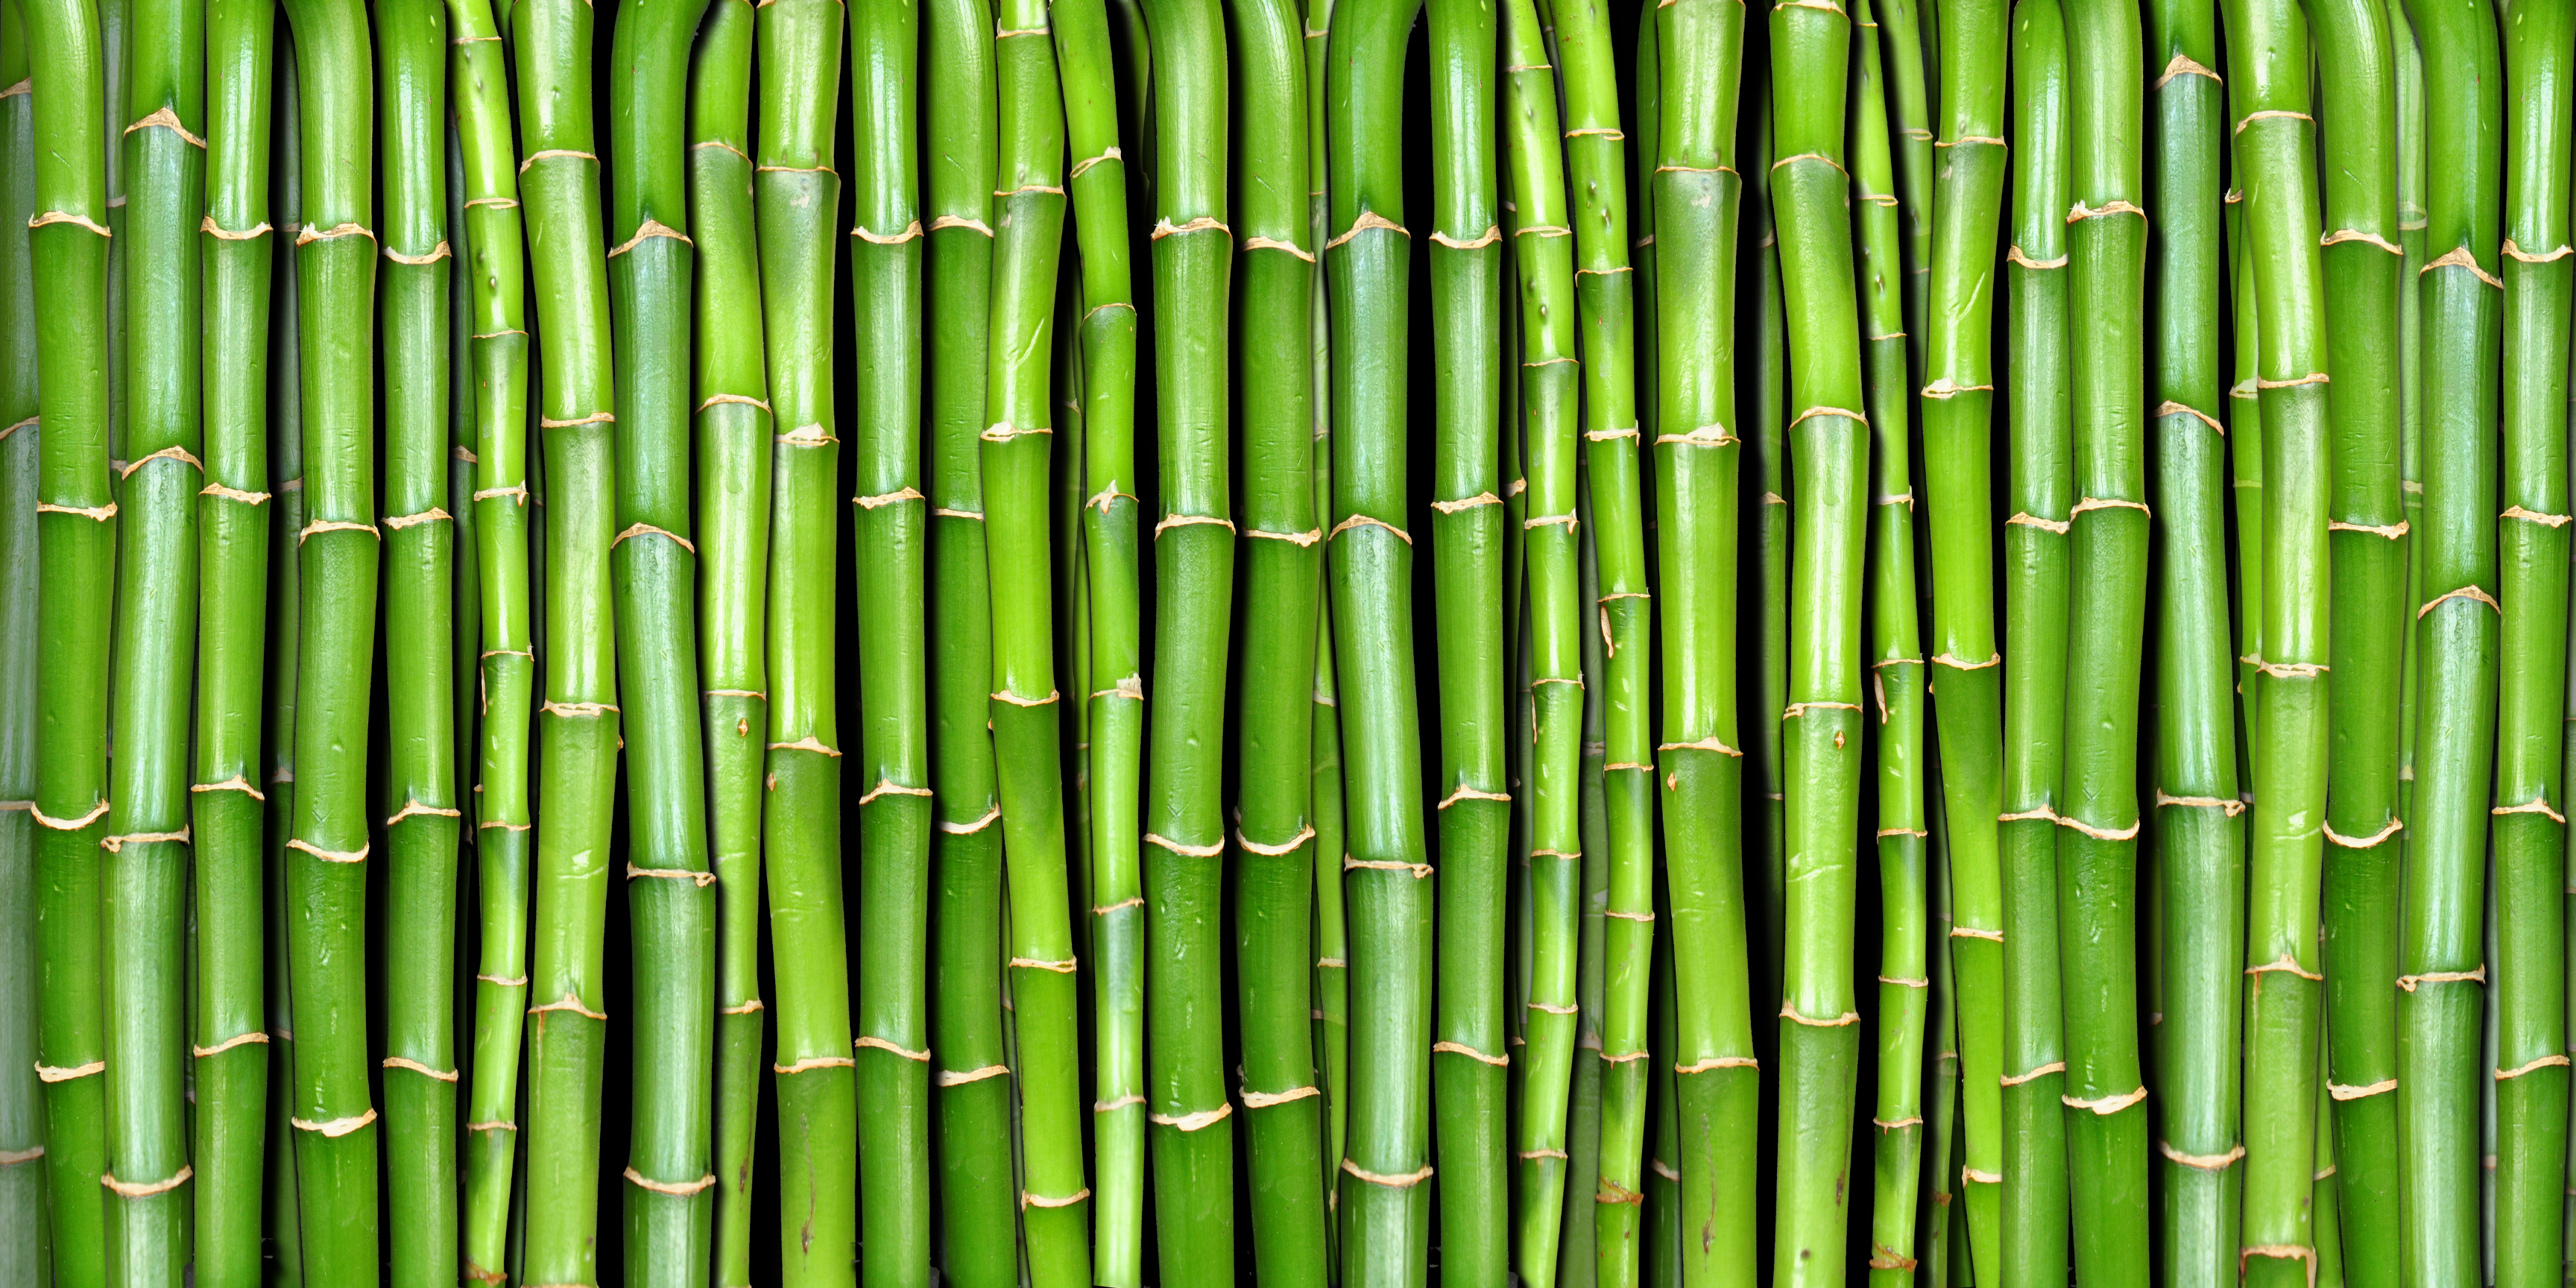 Why bamboo could be the material of the future